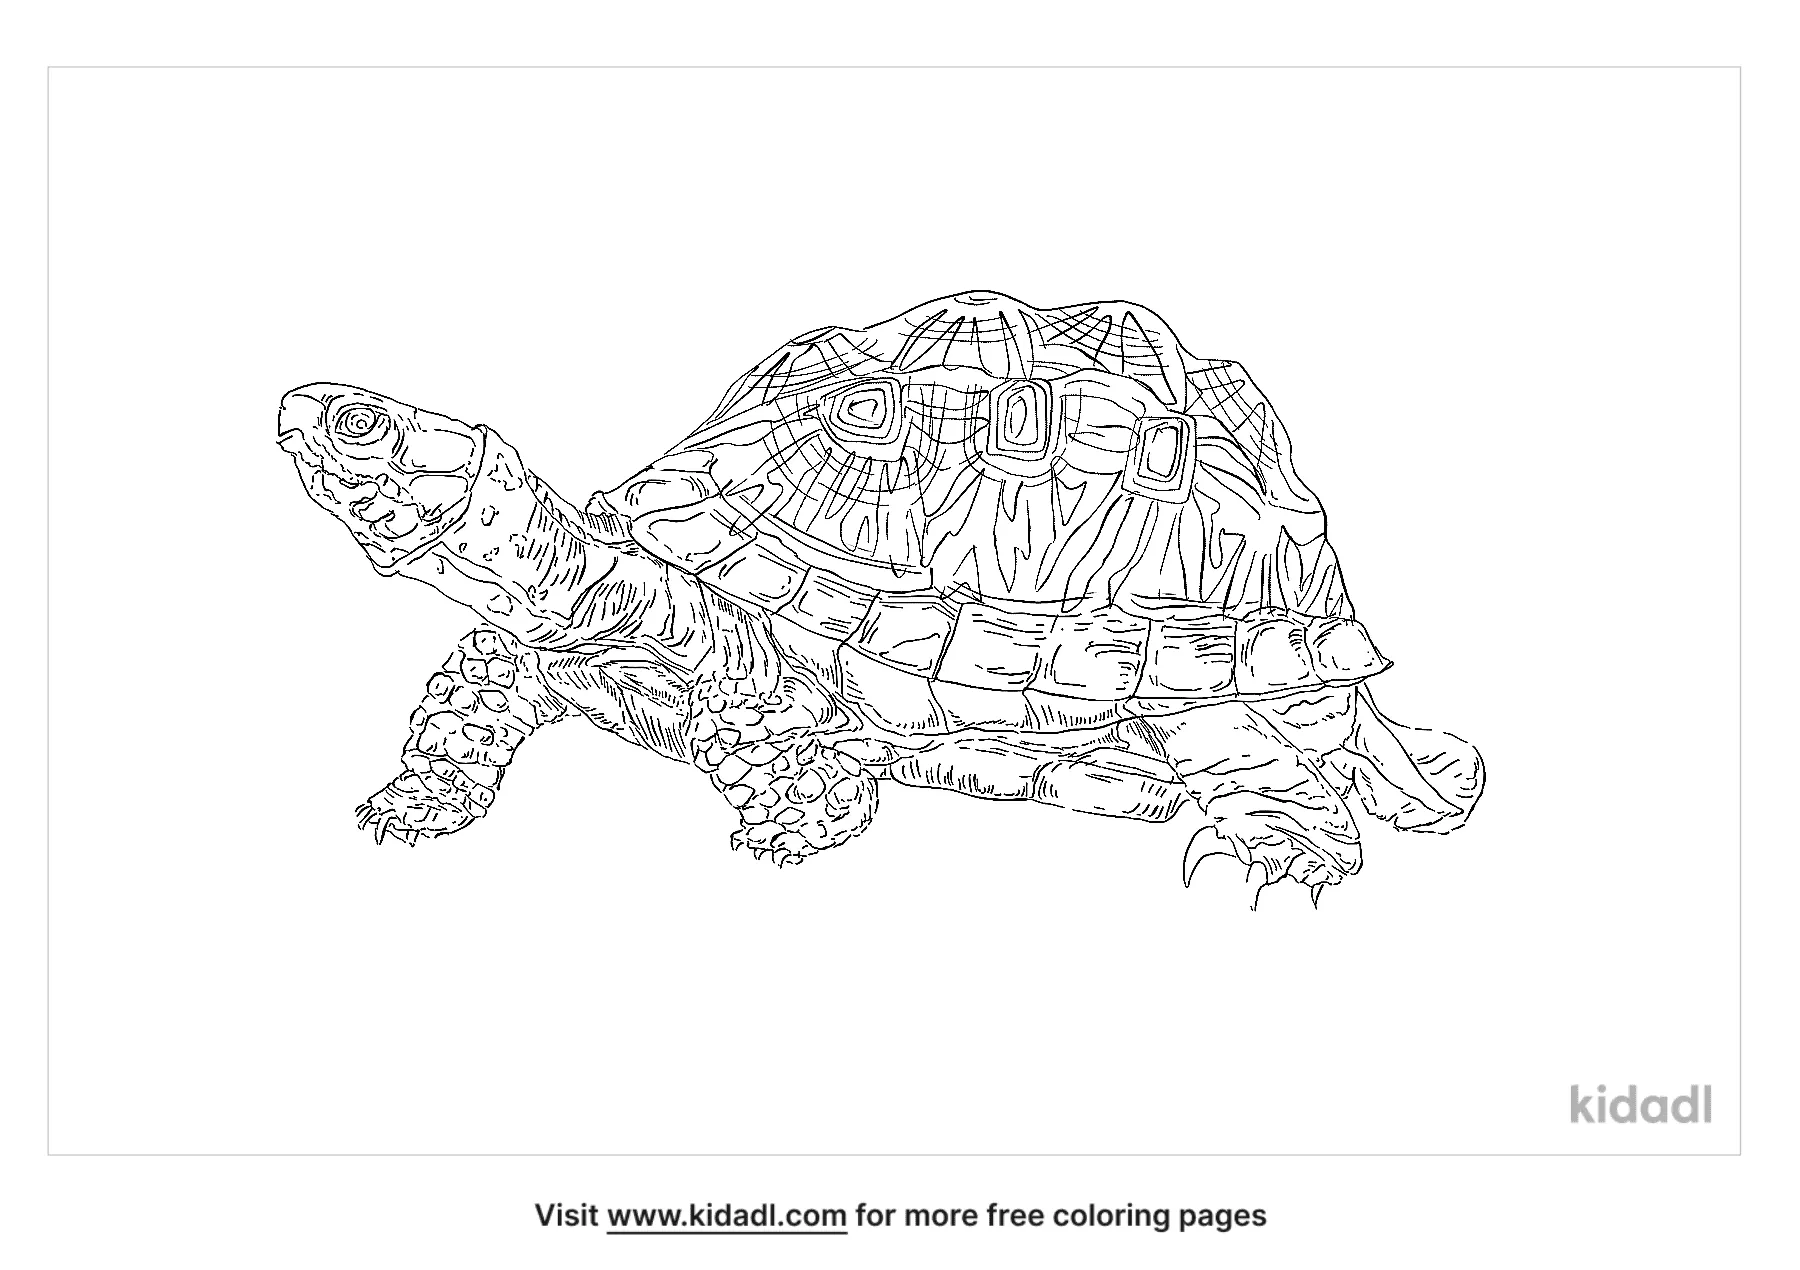 Free Geometric Tortoise Coloring Page | Coloring Page Printables | Kidadl